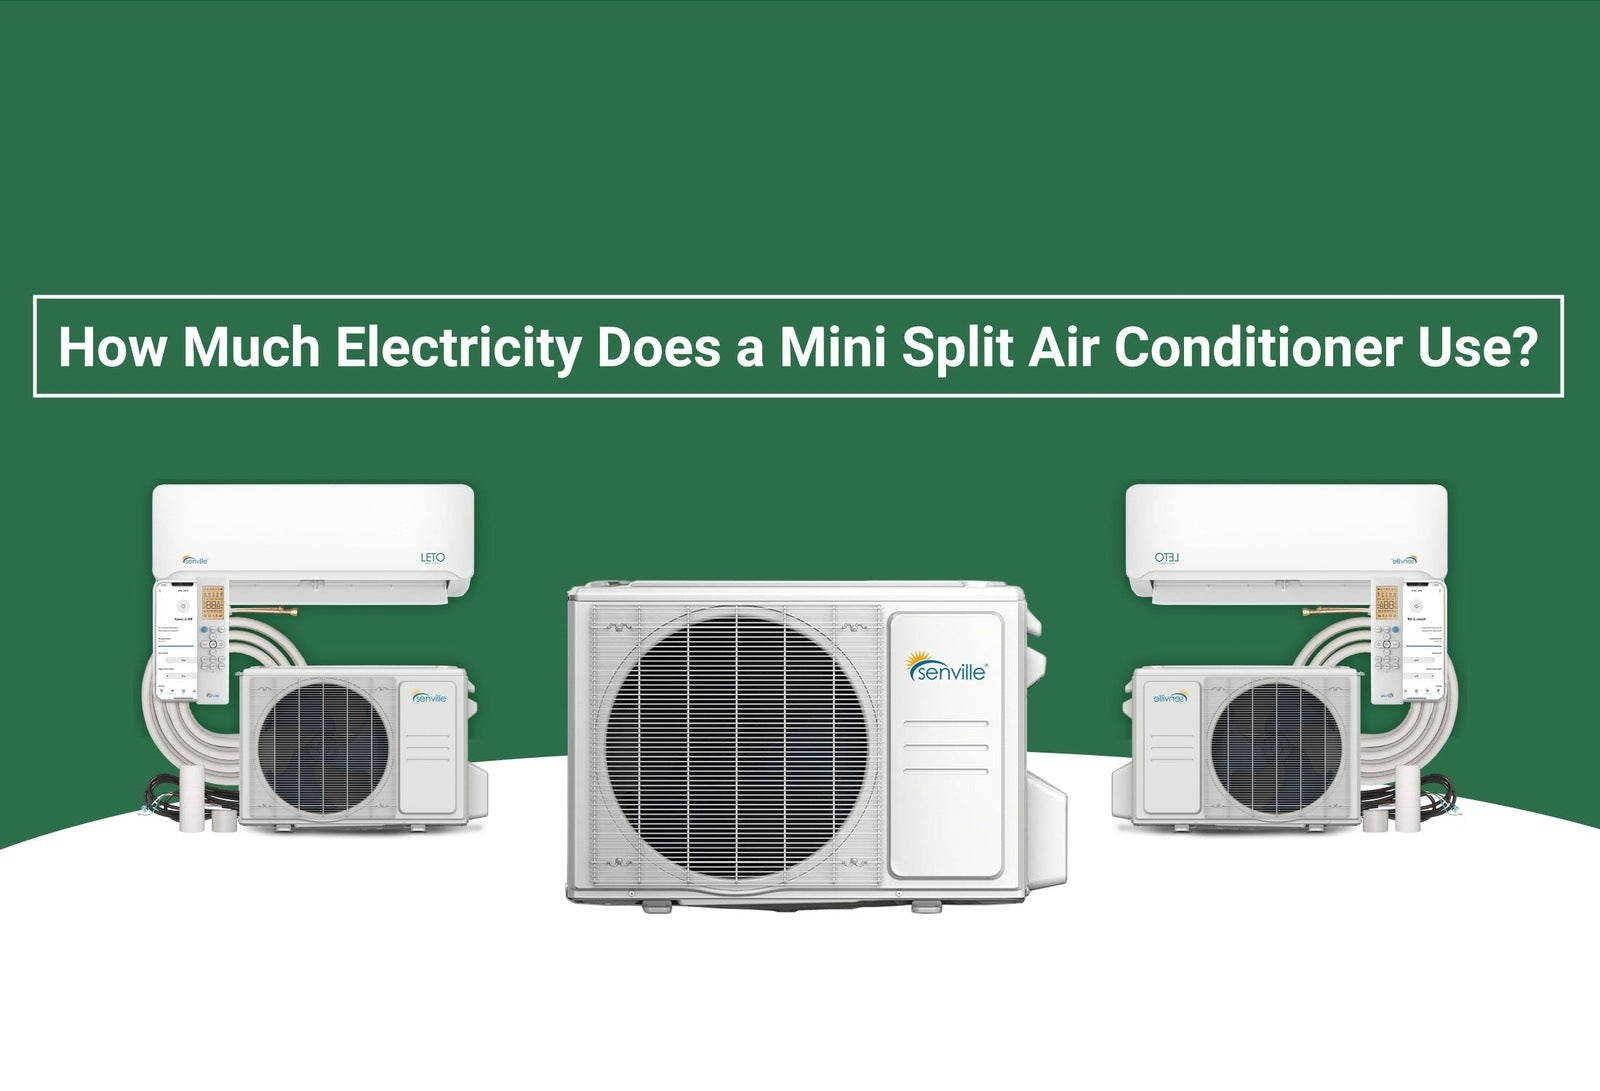 How Much Electricity Does a Mini Split Air Conditioner Use?